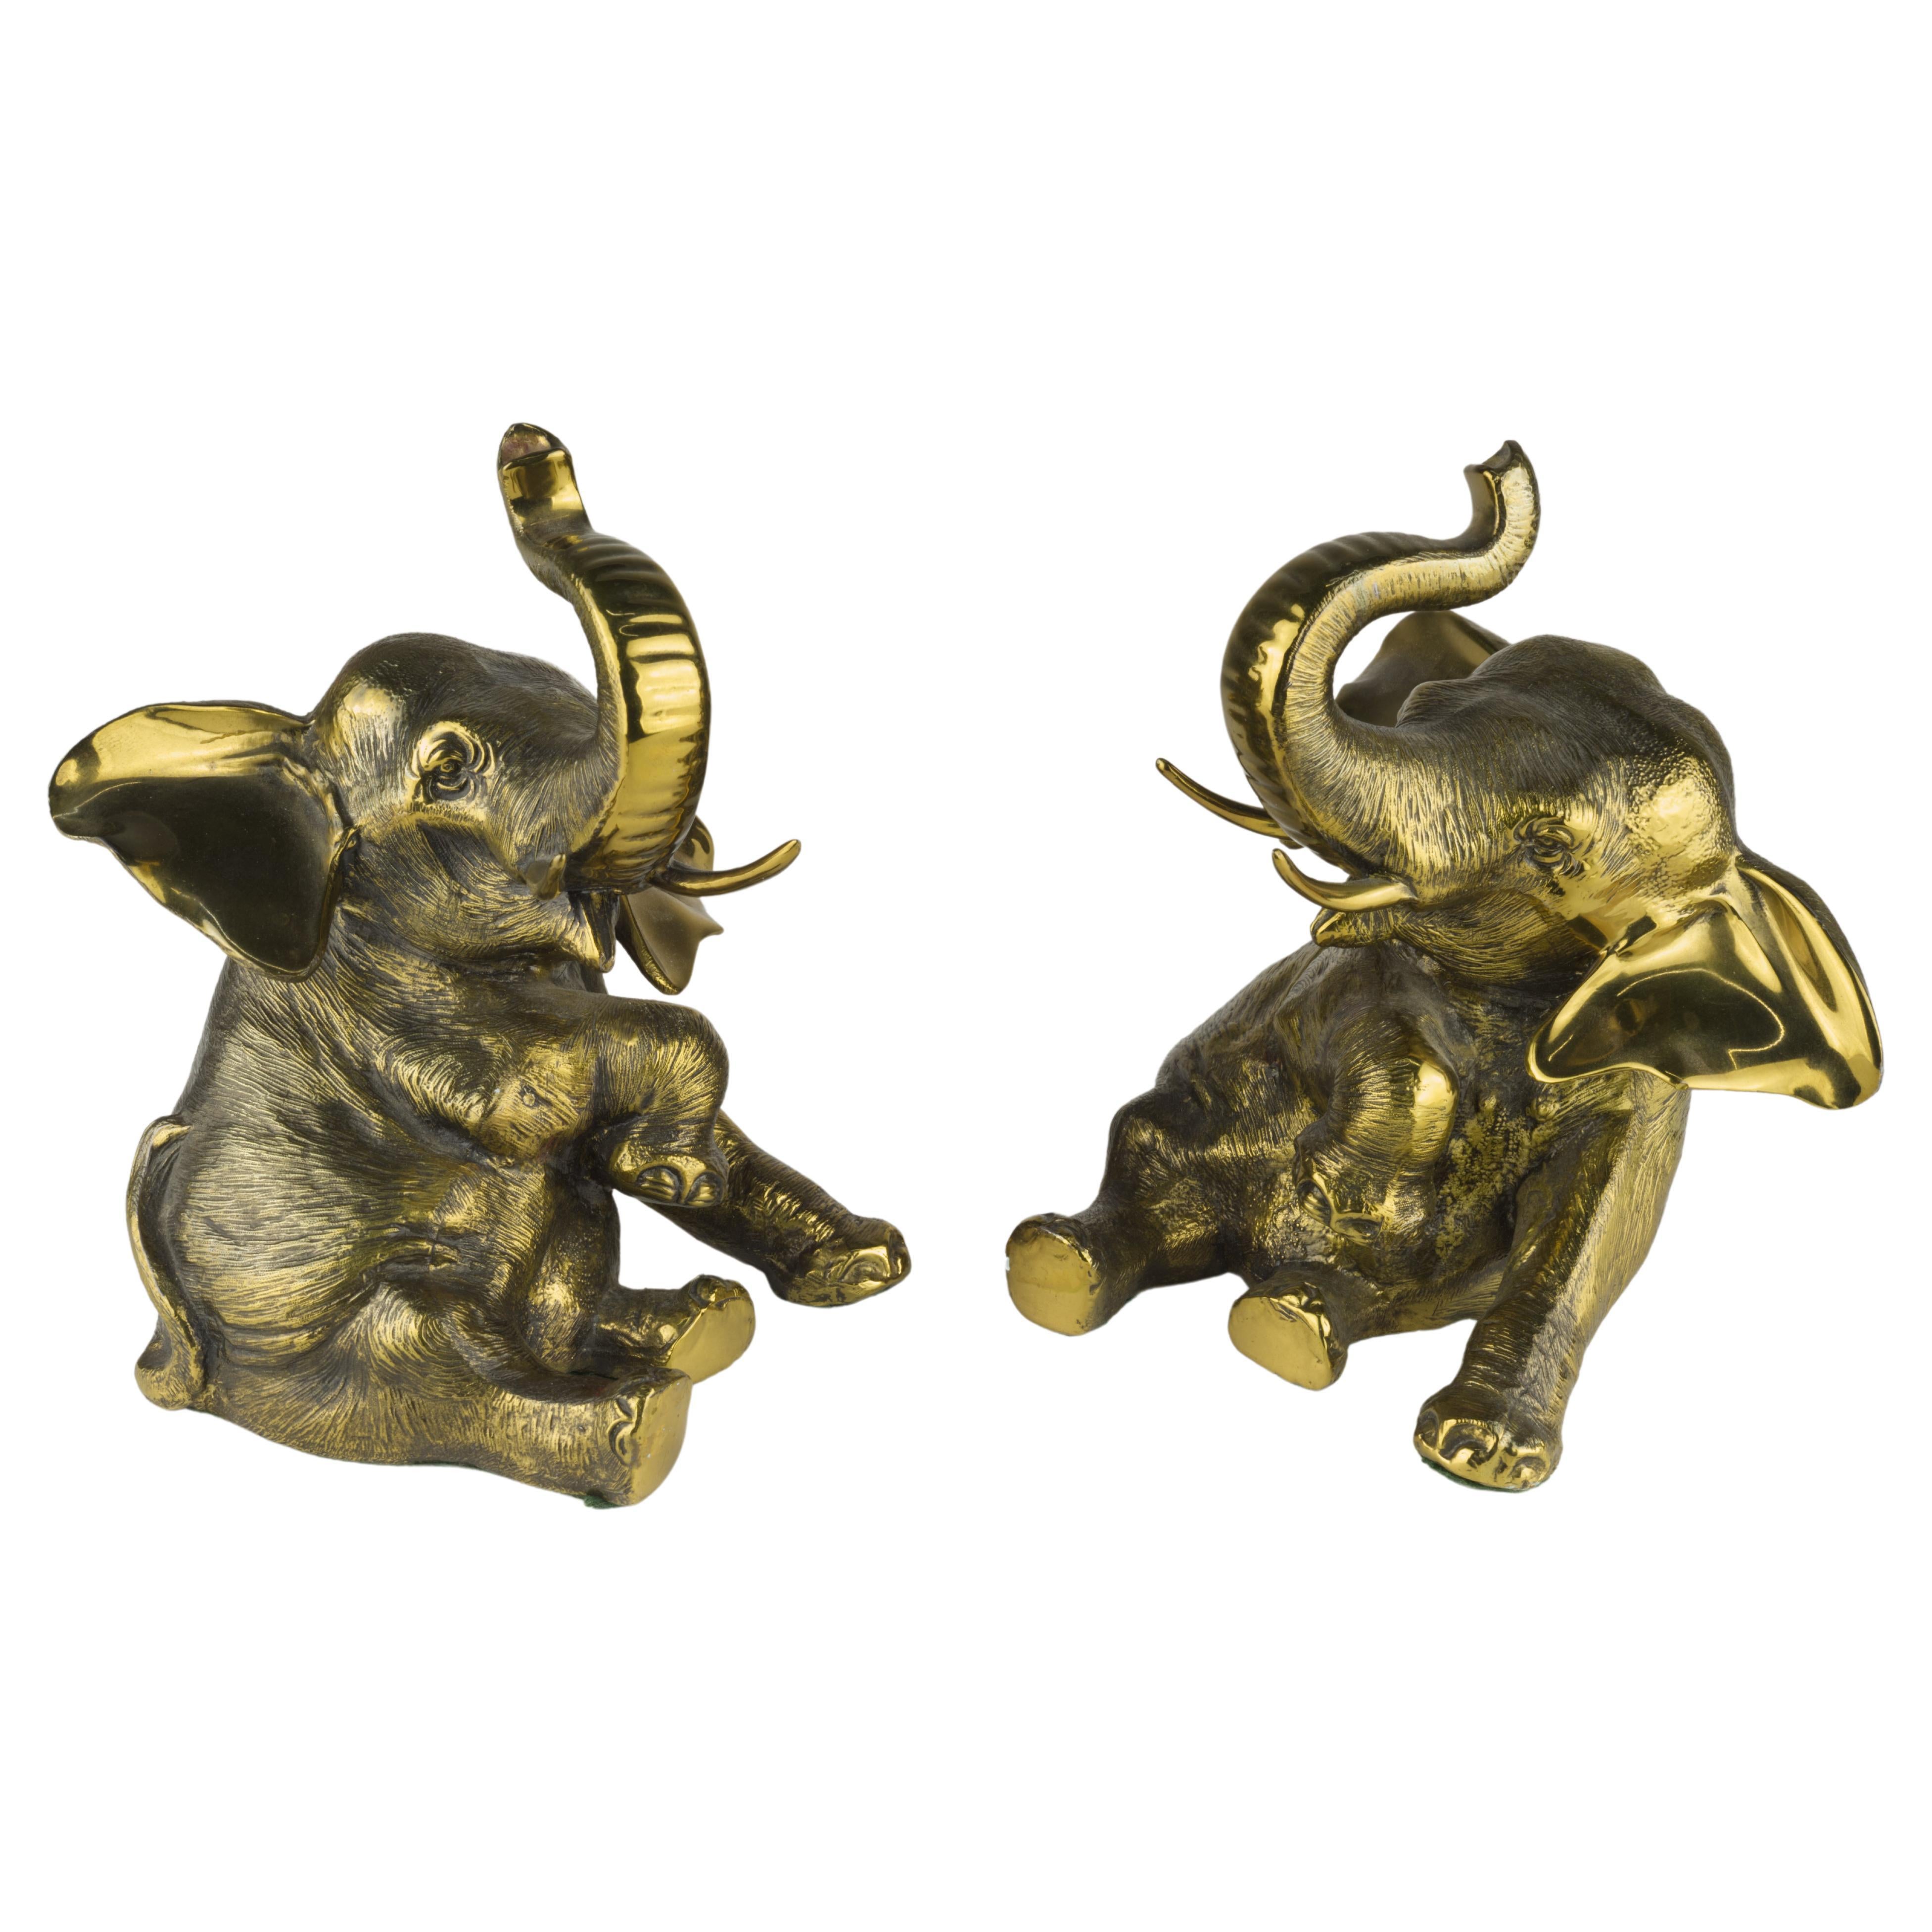 Jennings Brothers Pair of Bronze Elephant Bookends For Sale